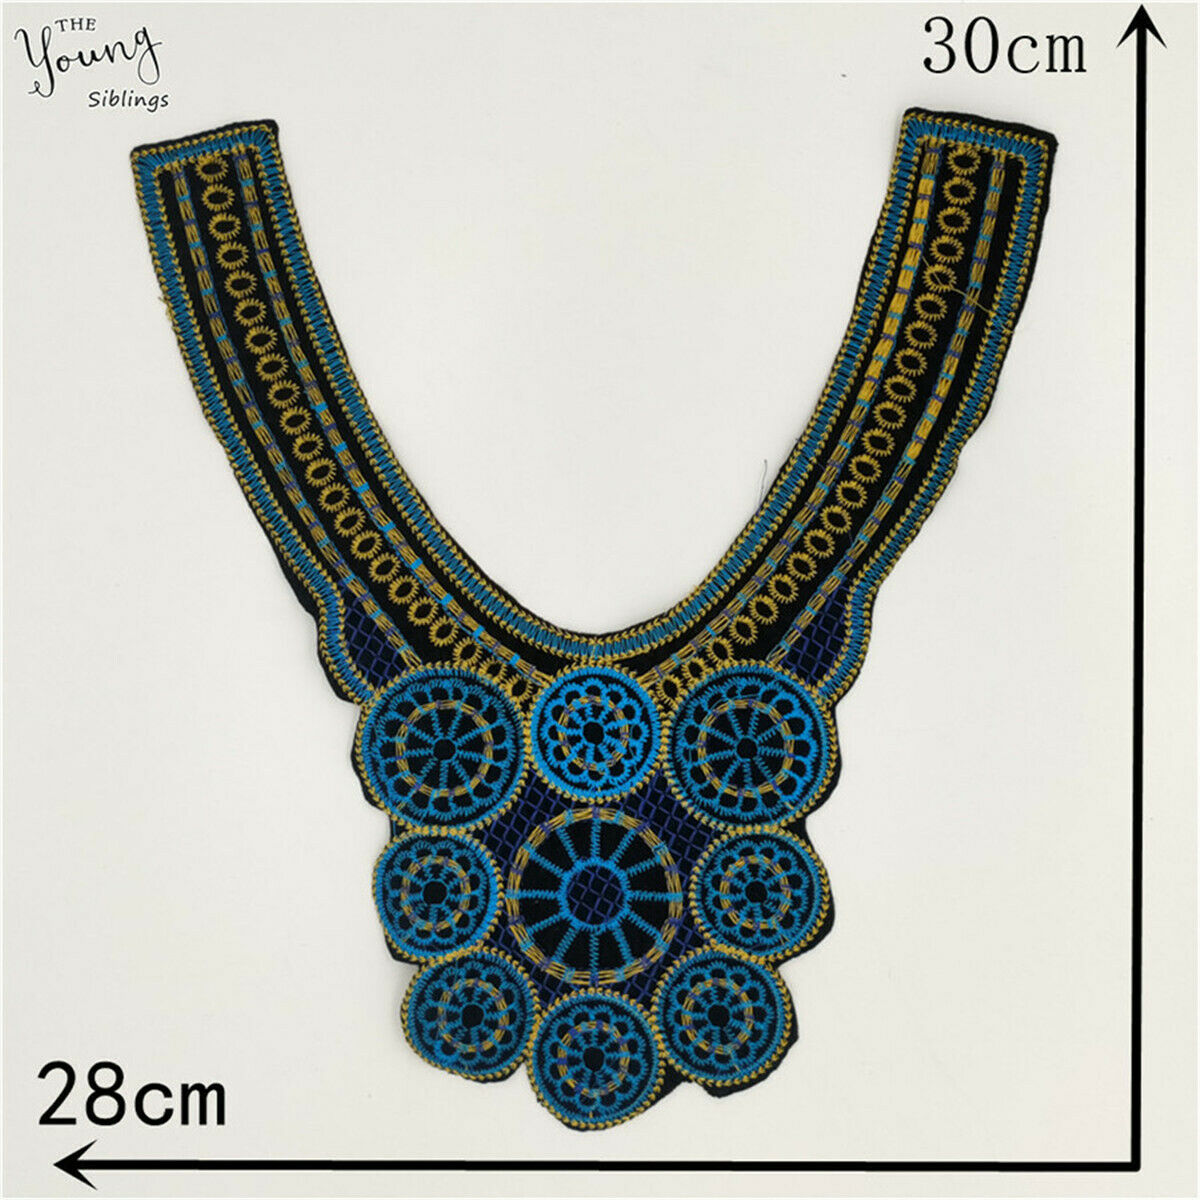 1 PC Ethnic style Embroidery Lace Collar Decor DIY Sewing Patch Lace Applique